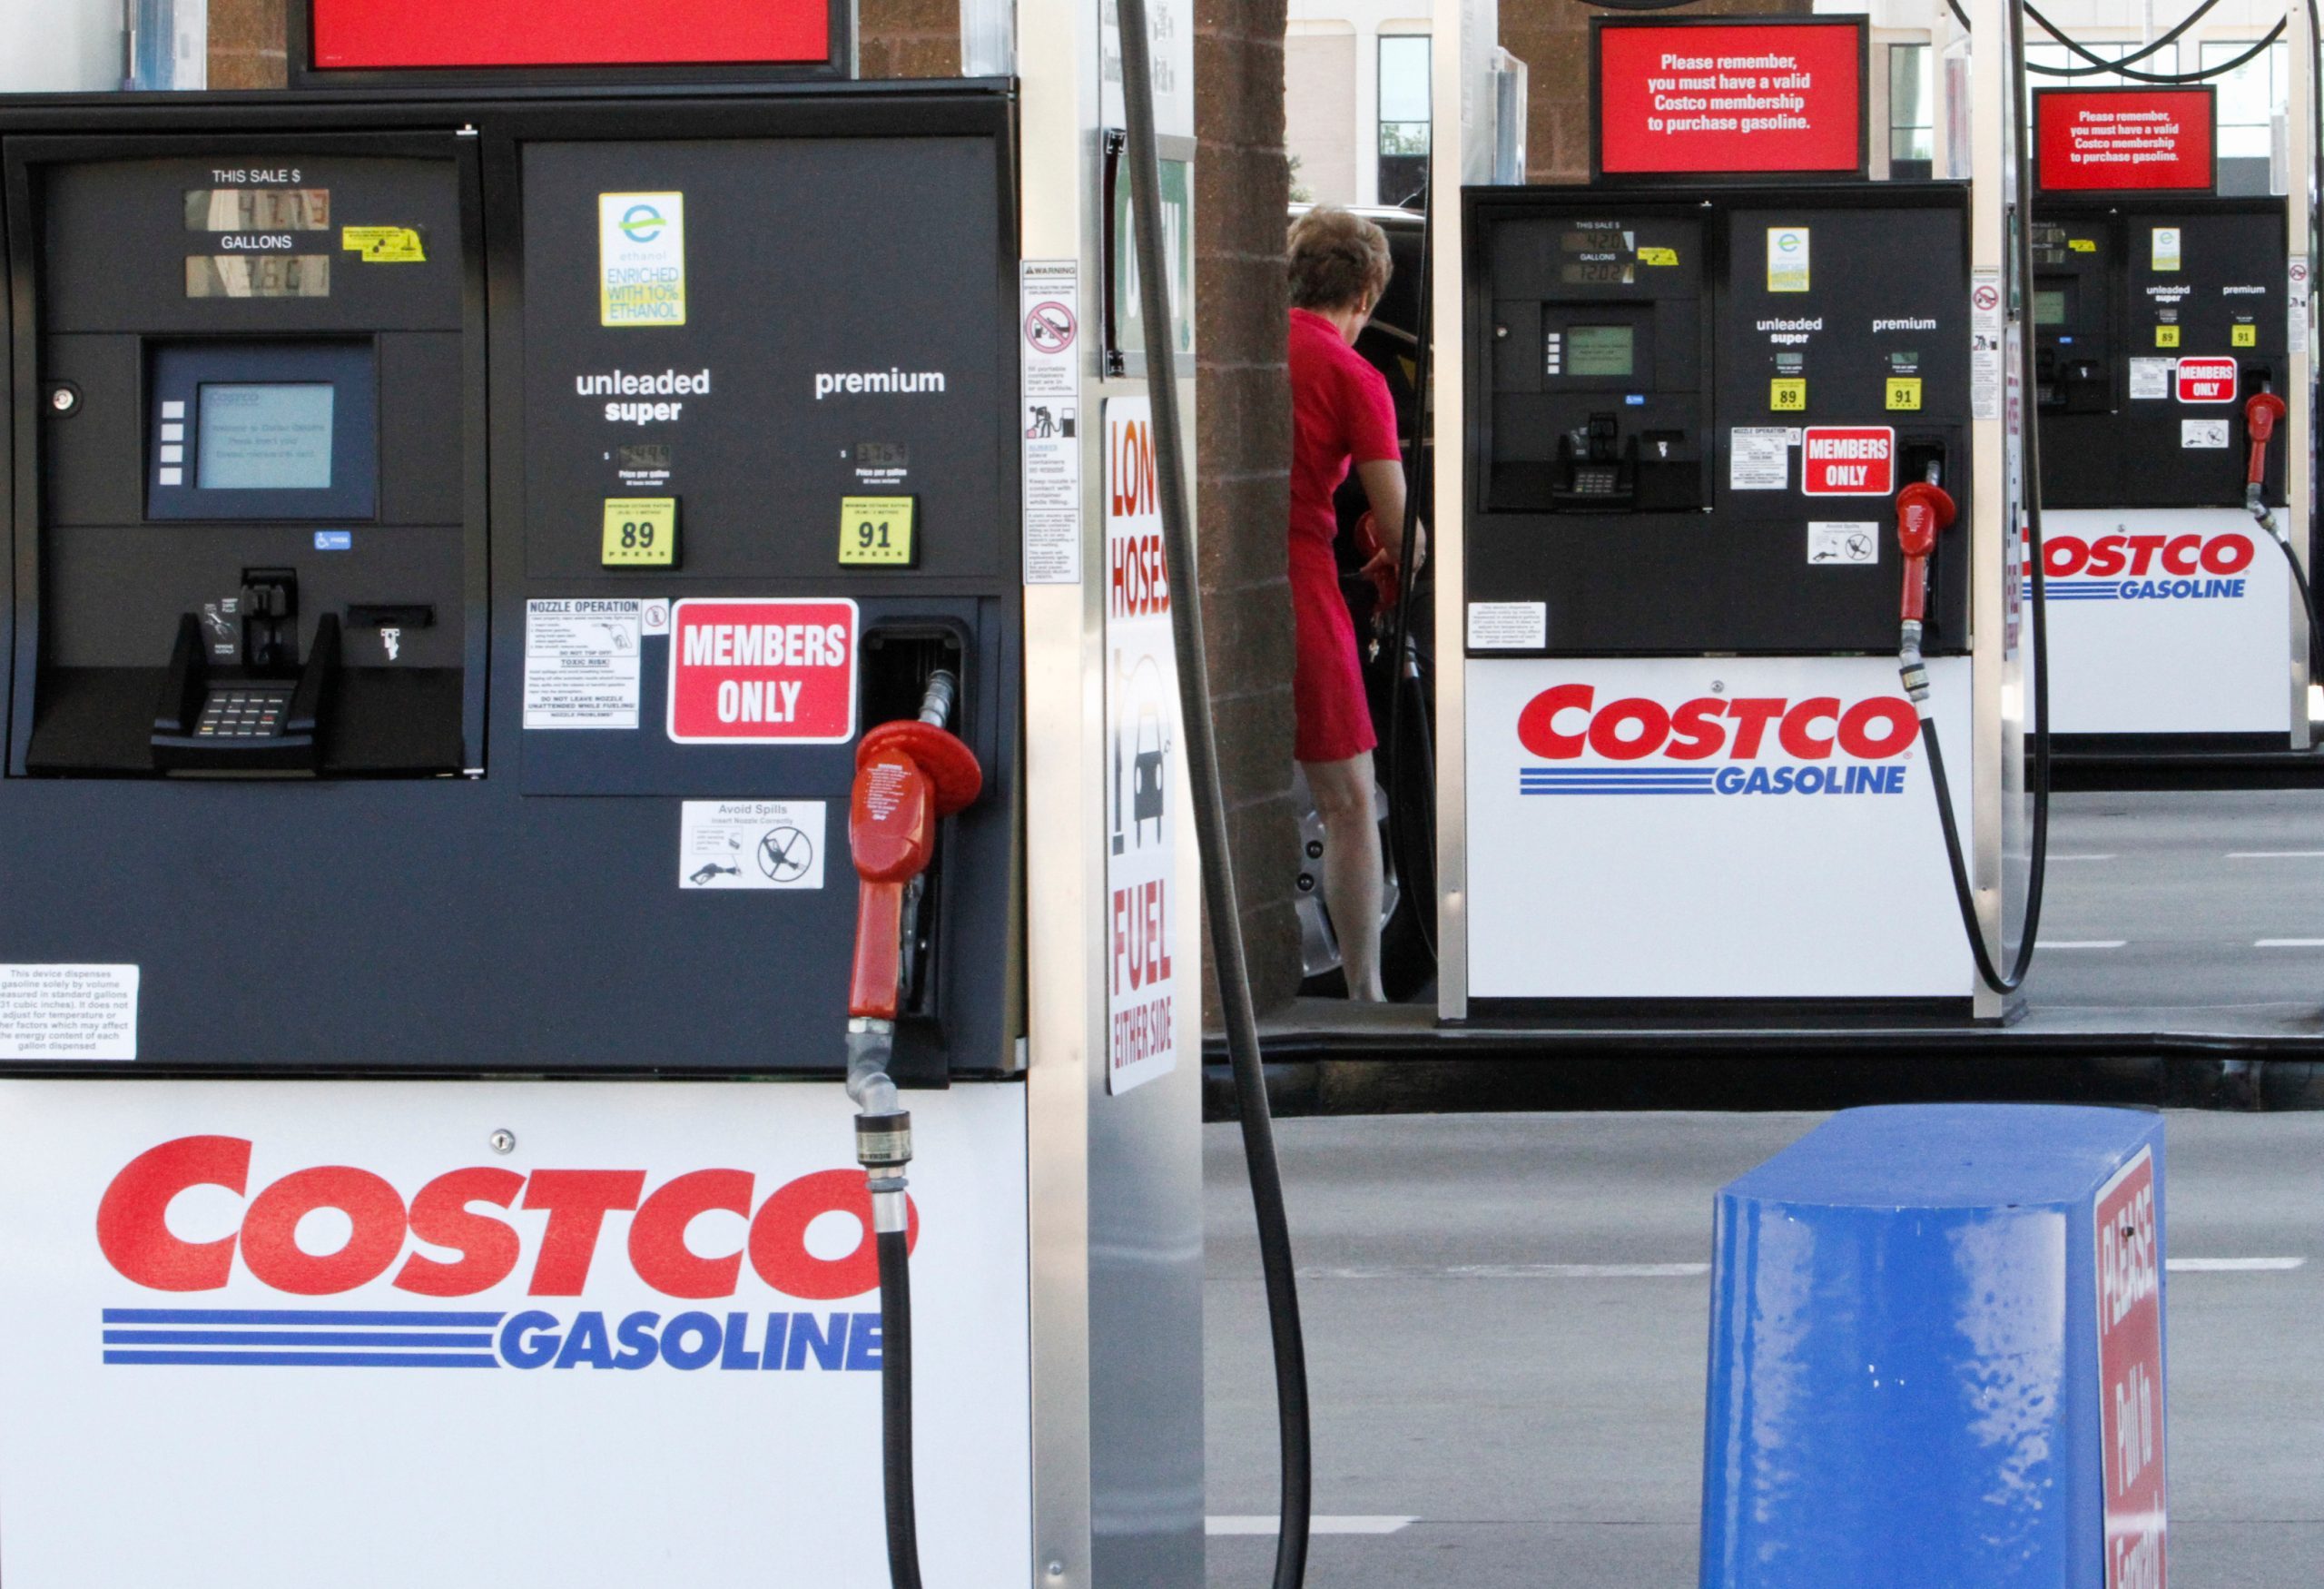 Costco Gas Price: How Costco Keeps Their Gas Cheap 2022